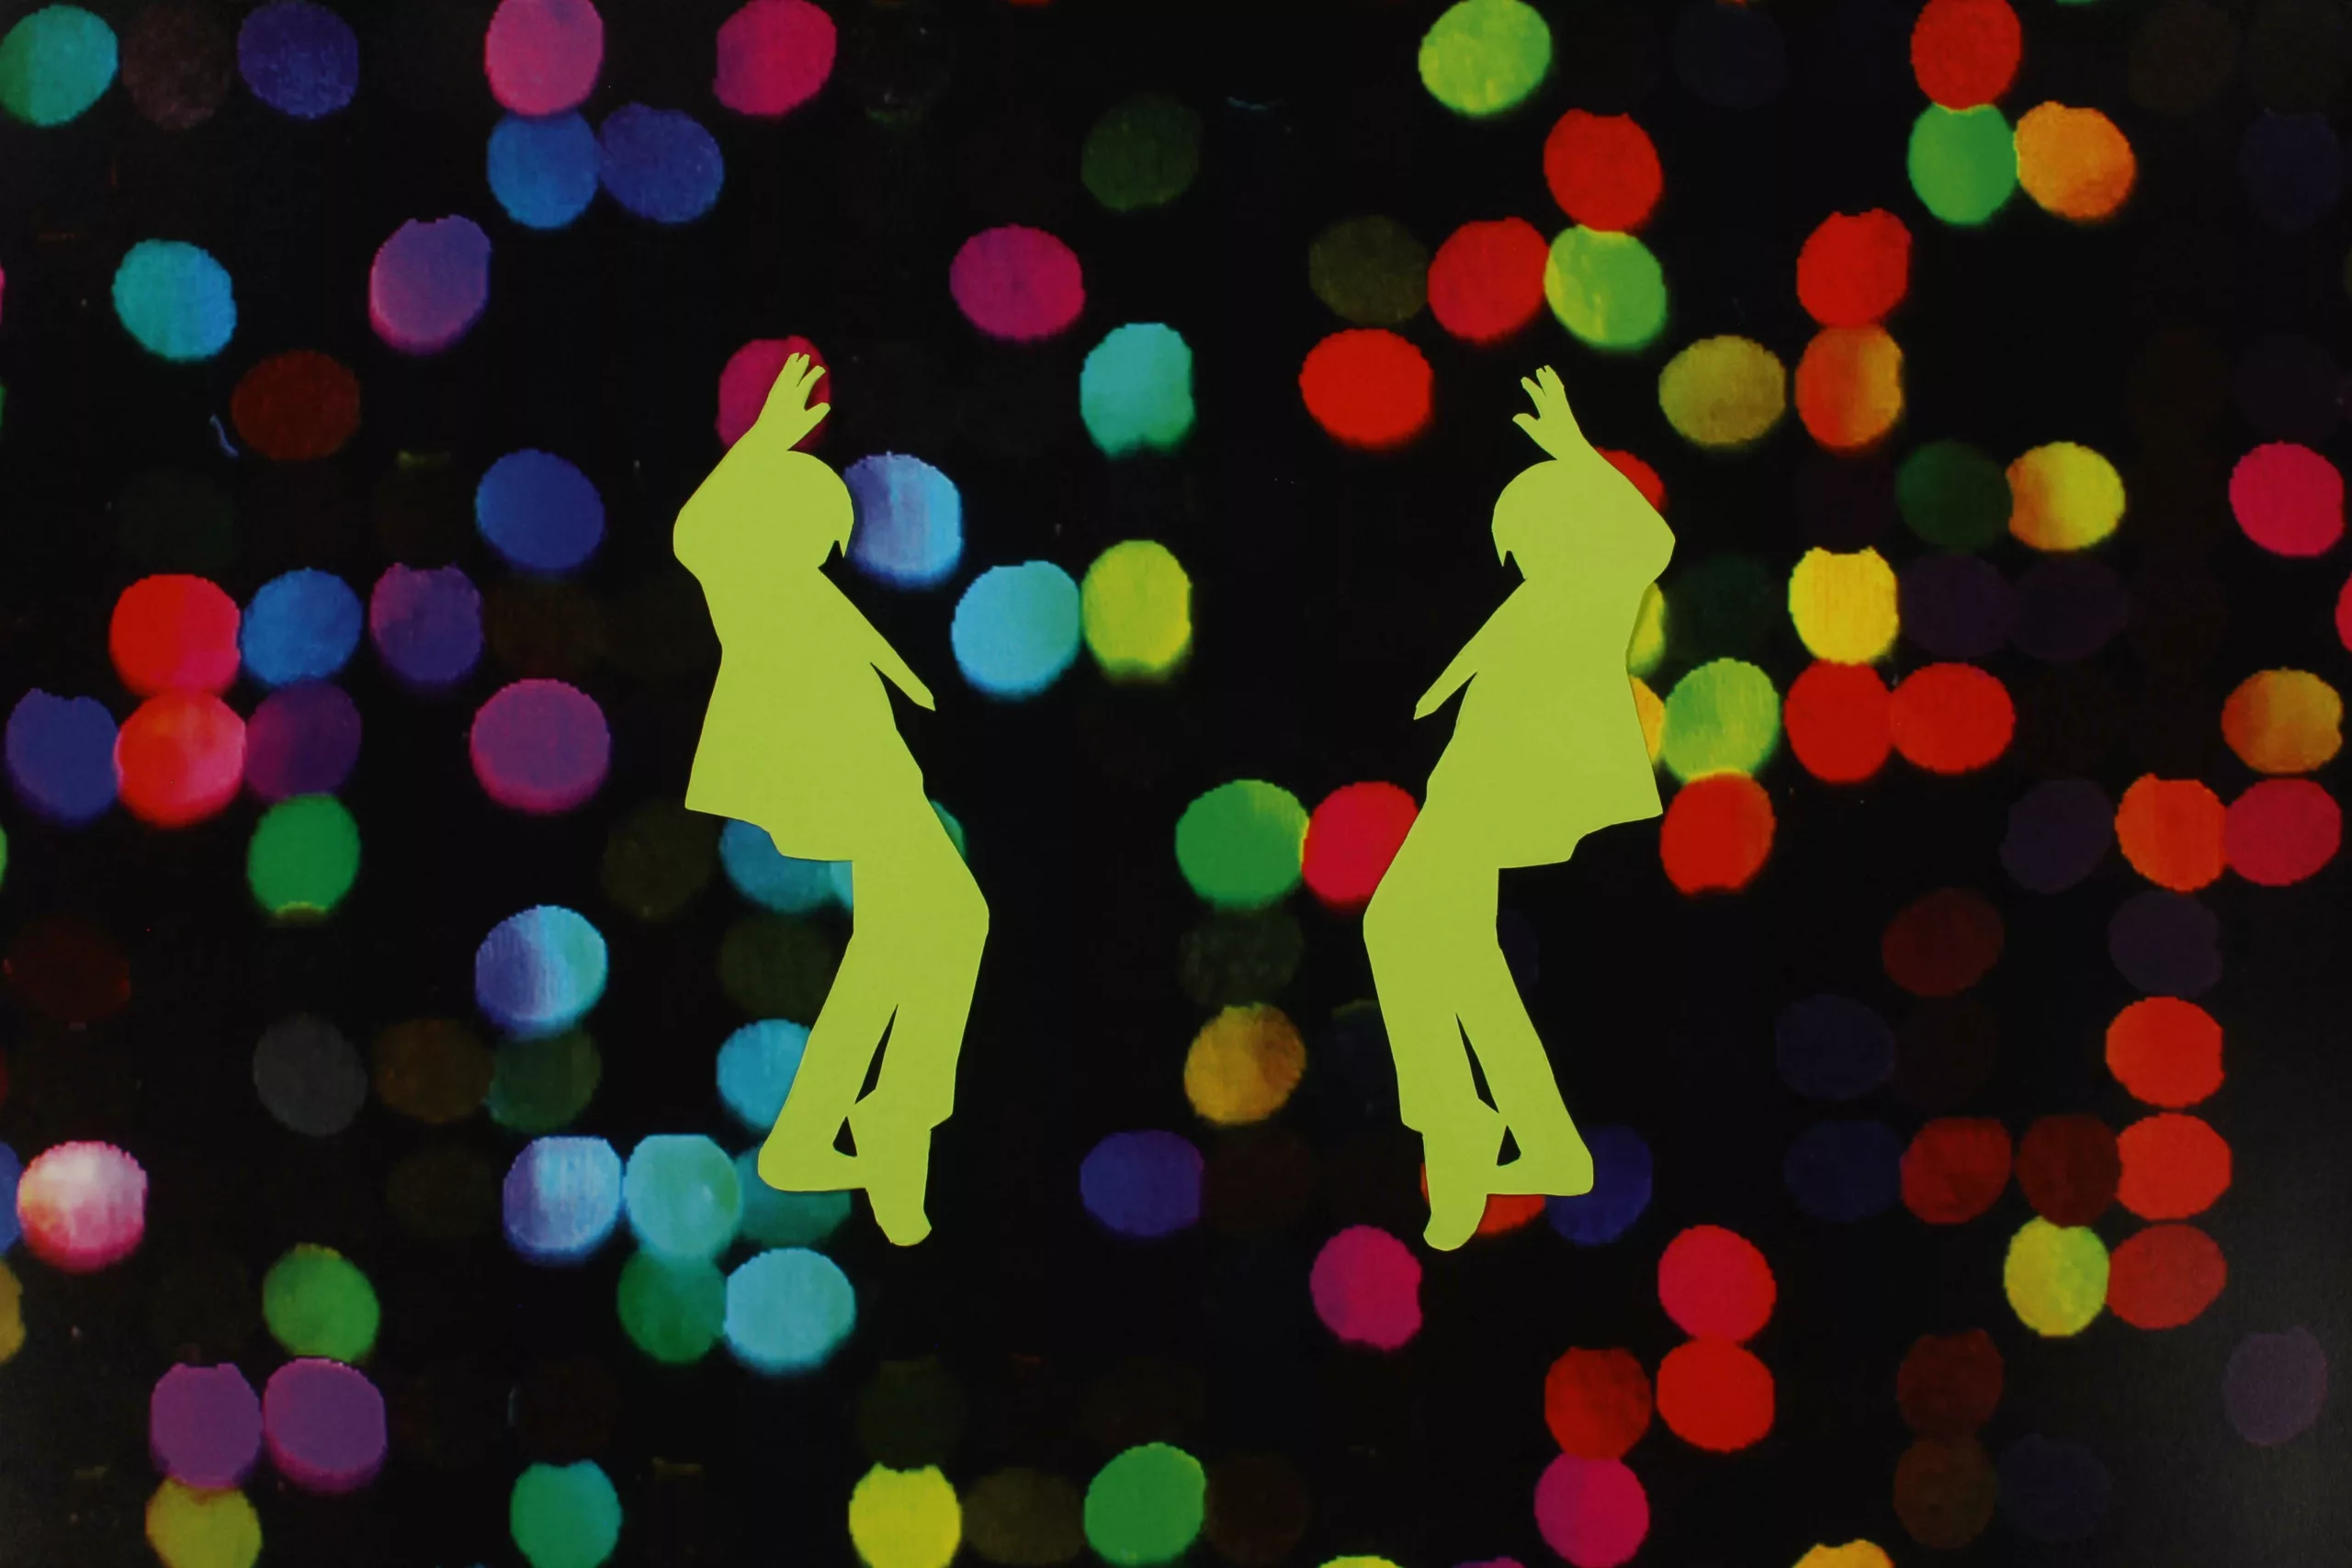 Green figures dancing with Big dots of many colors in the background